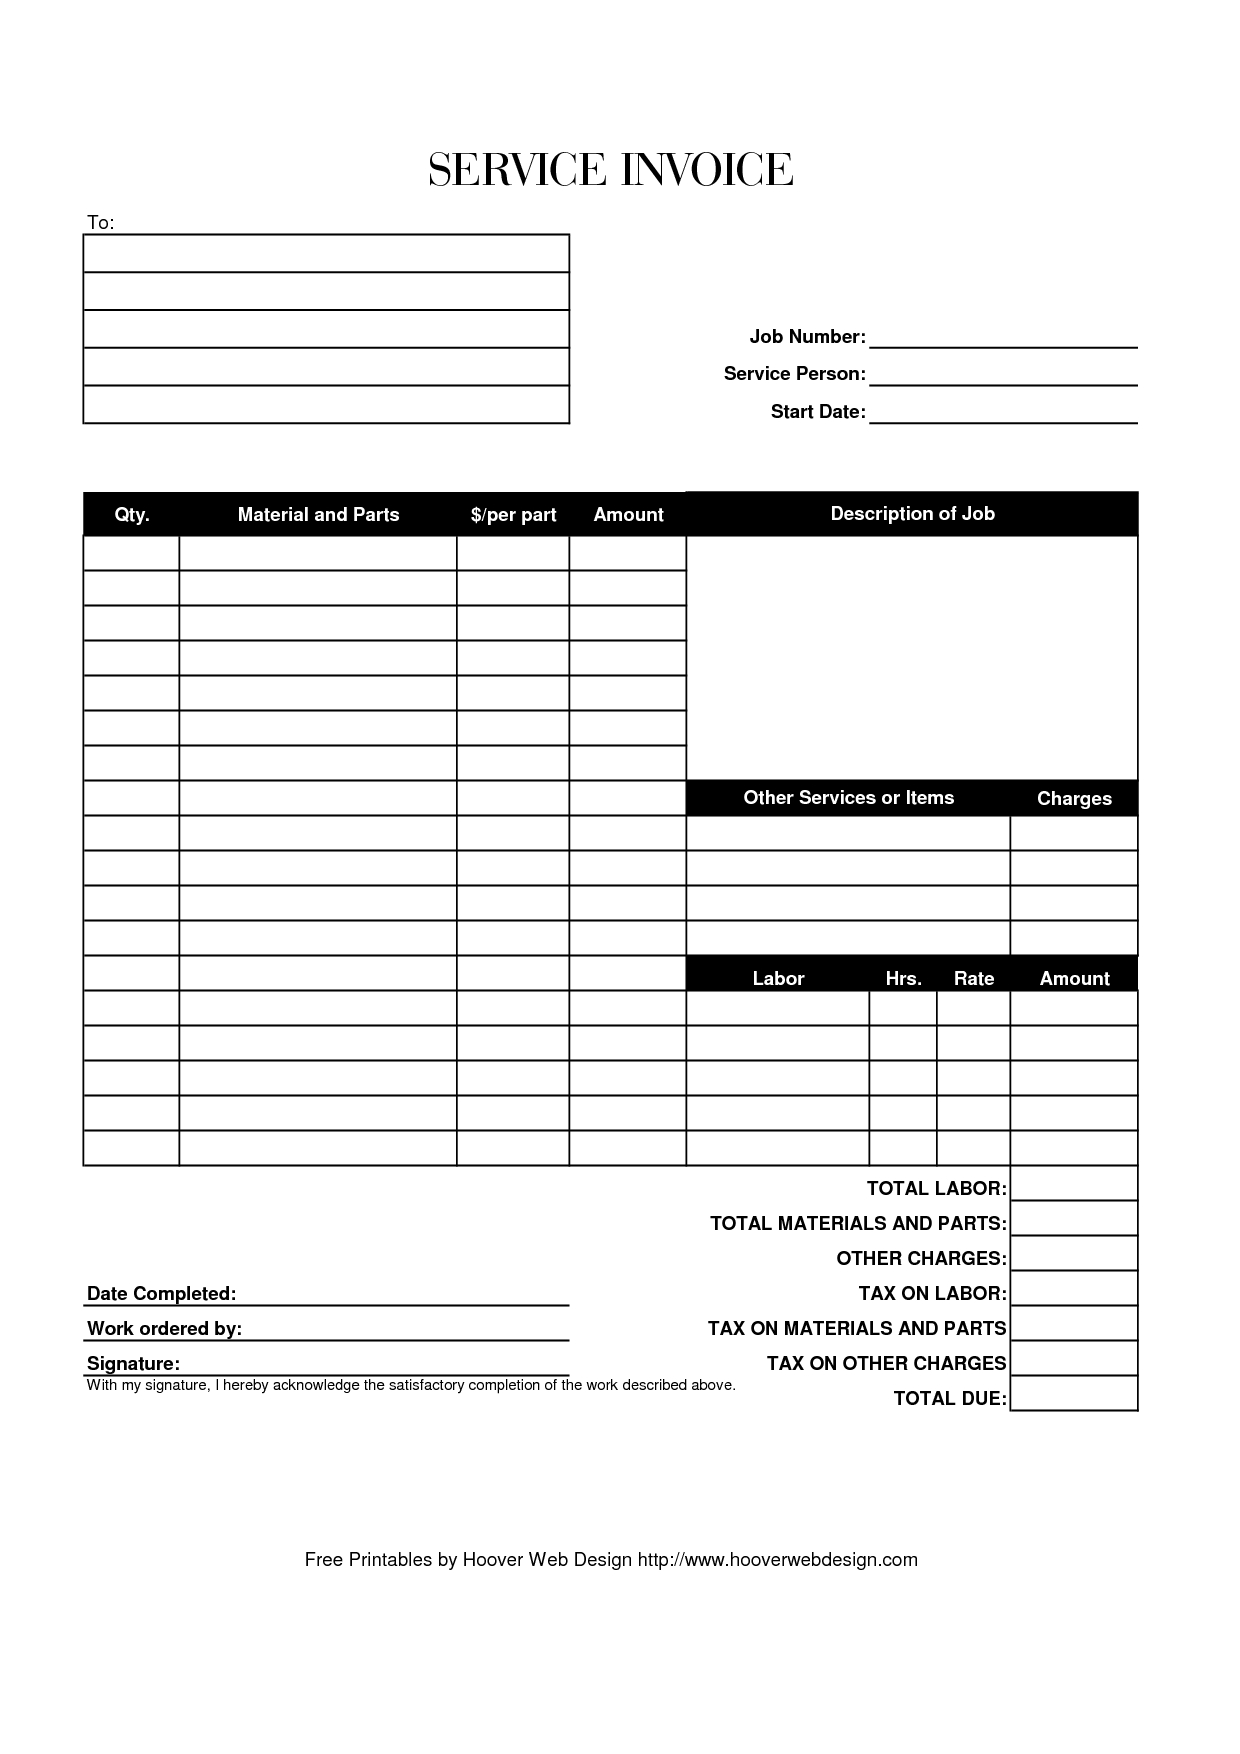 hoover receipts free printable service invoice template pdf free printable invoices forms